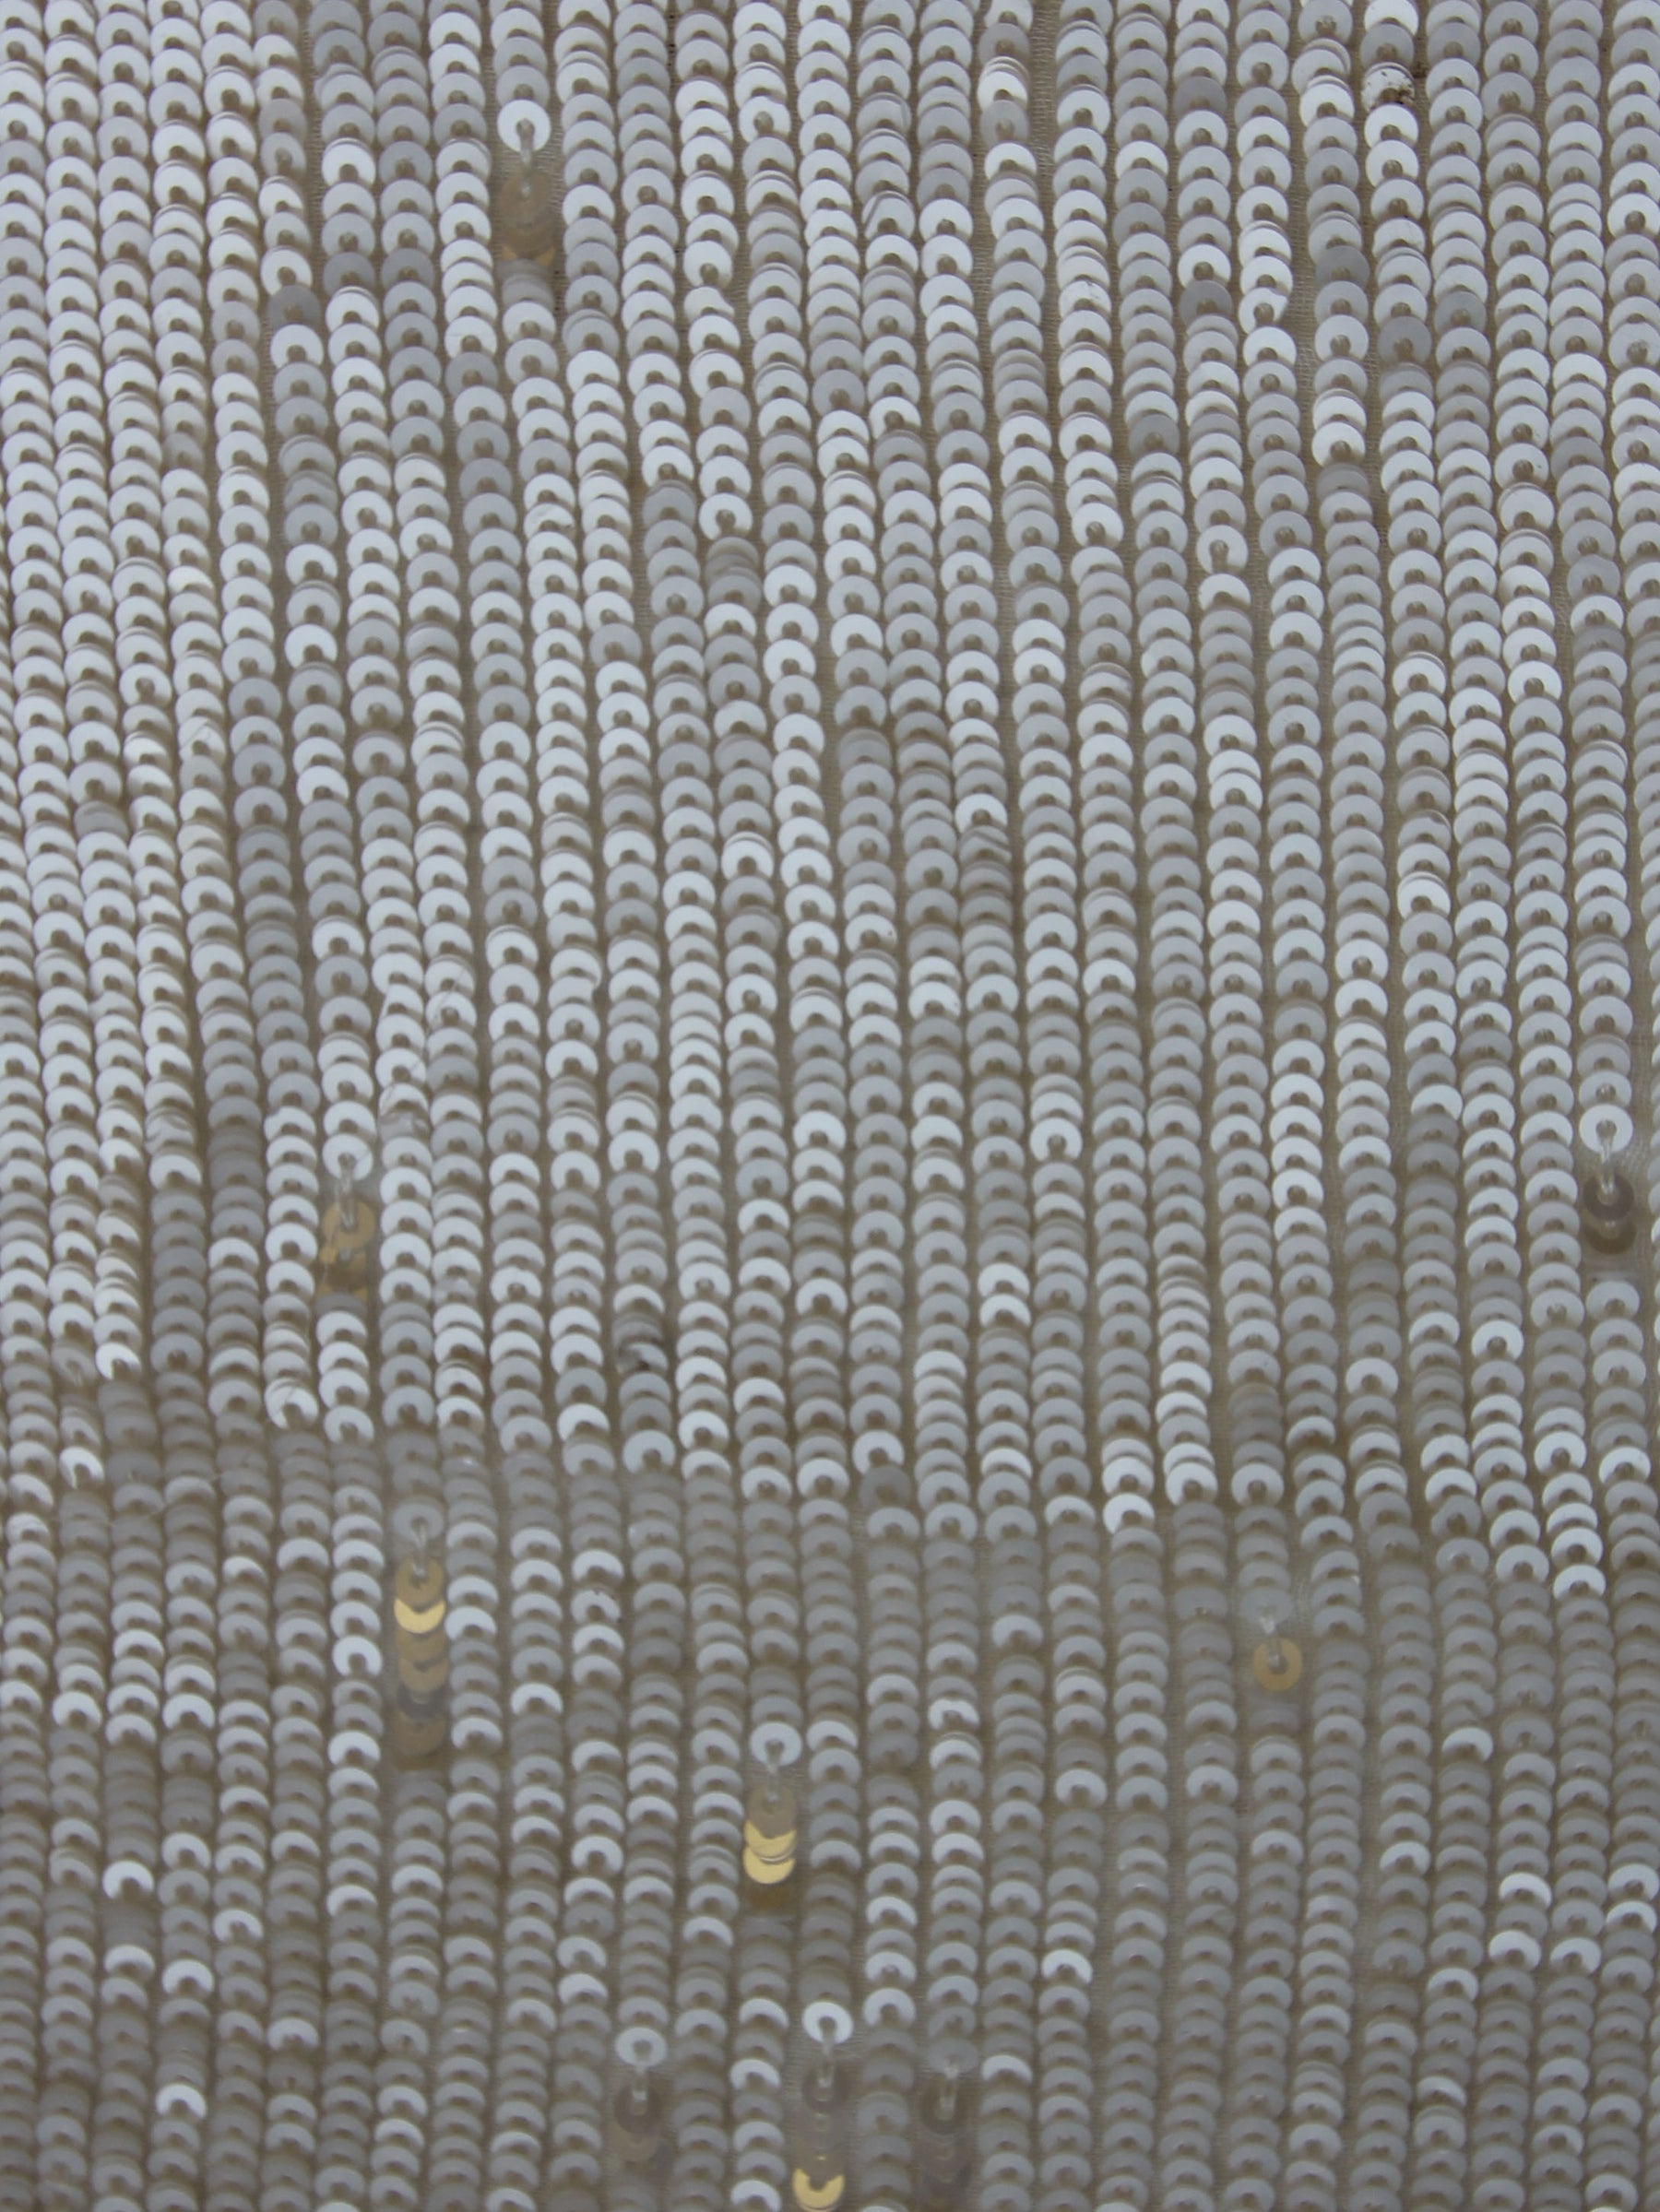 Ivory Sequinned Fabric - Chenca